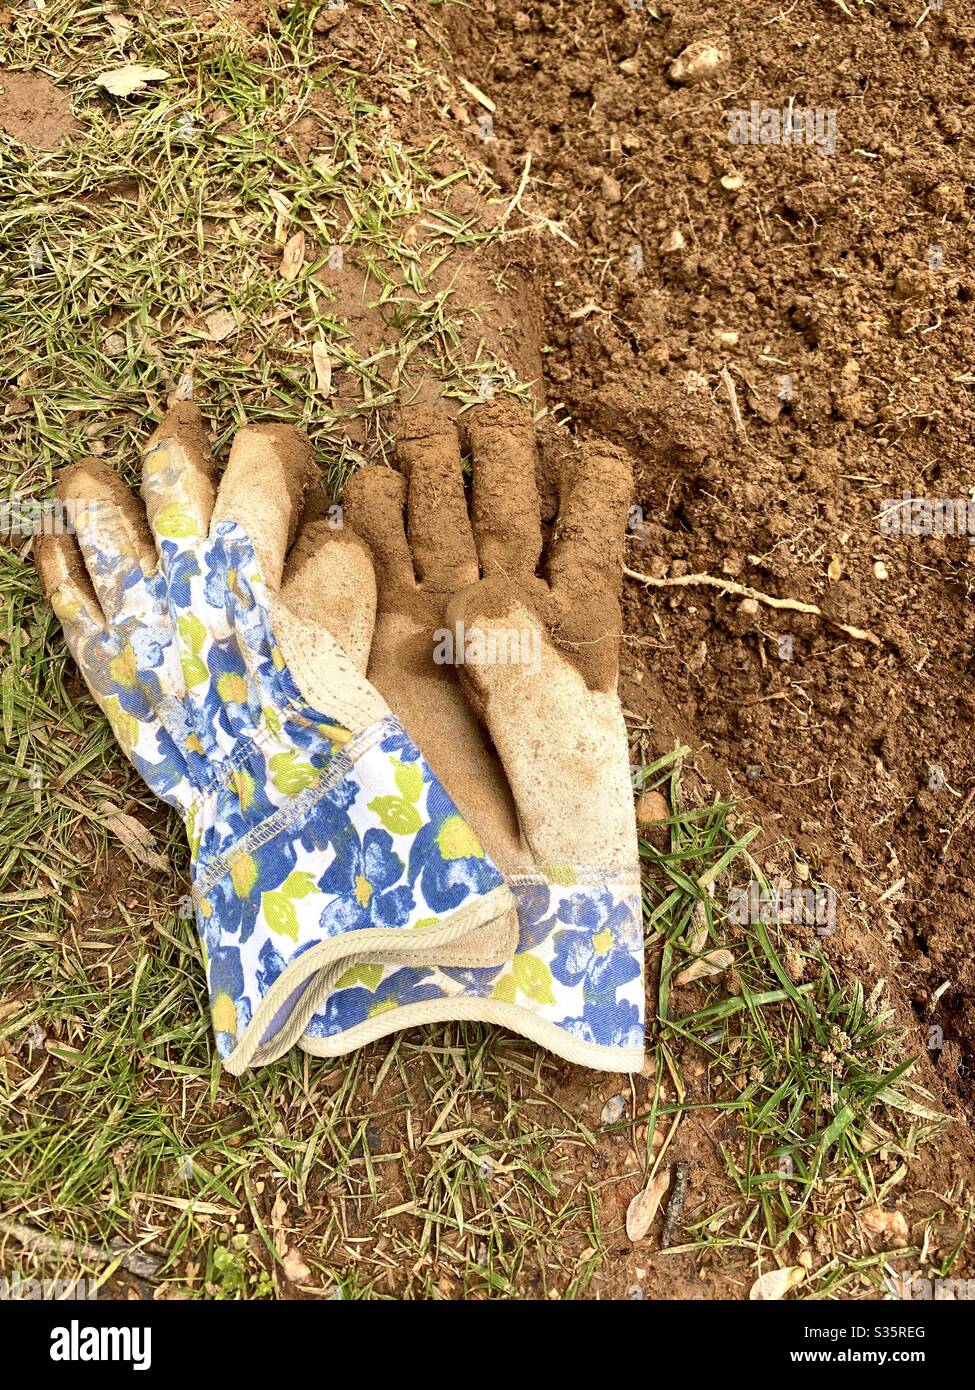 Garden gloves showing signs of hard work in the yard. Stock Photo